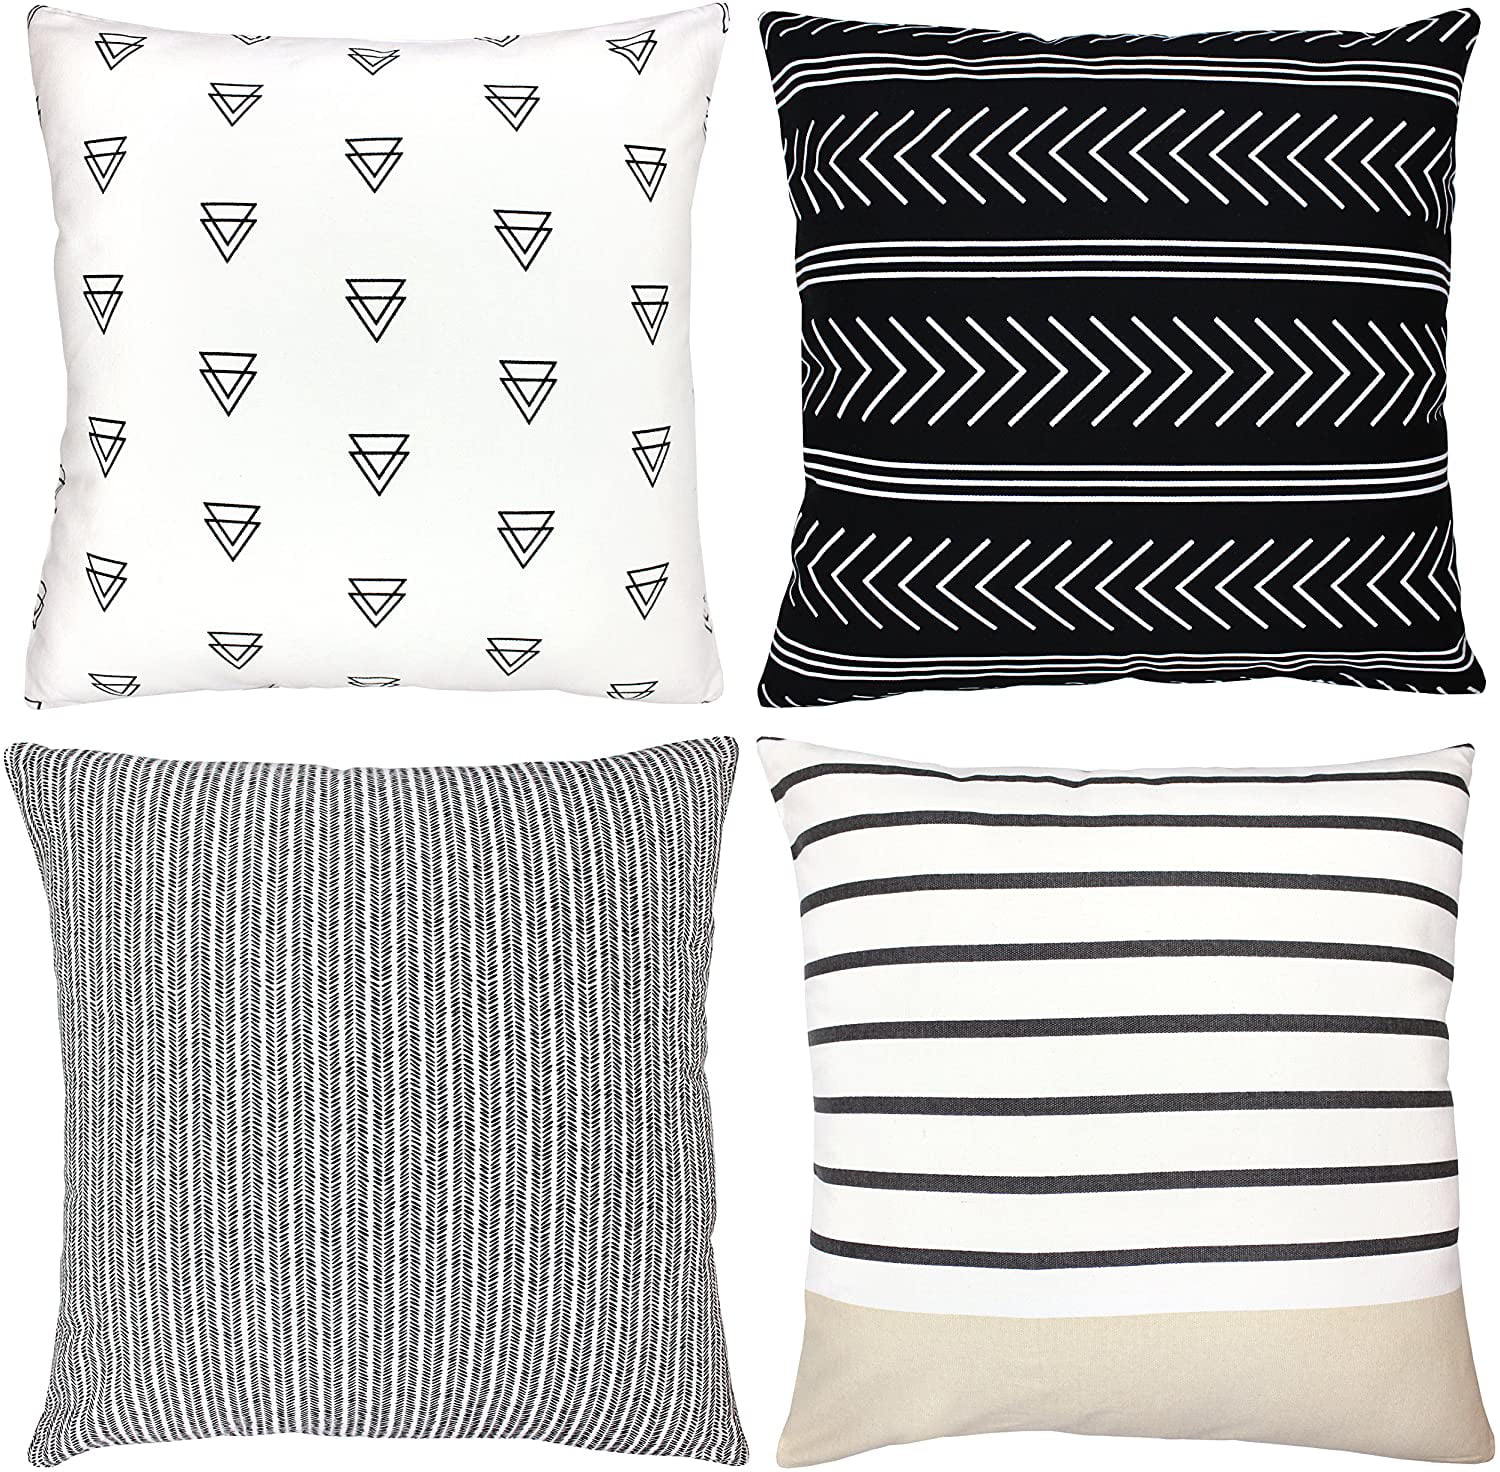 Popeve Set of 4 Throw Pillow Covers Black and White Cotton Canvas ...